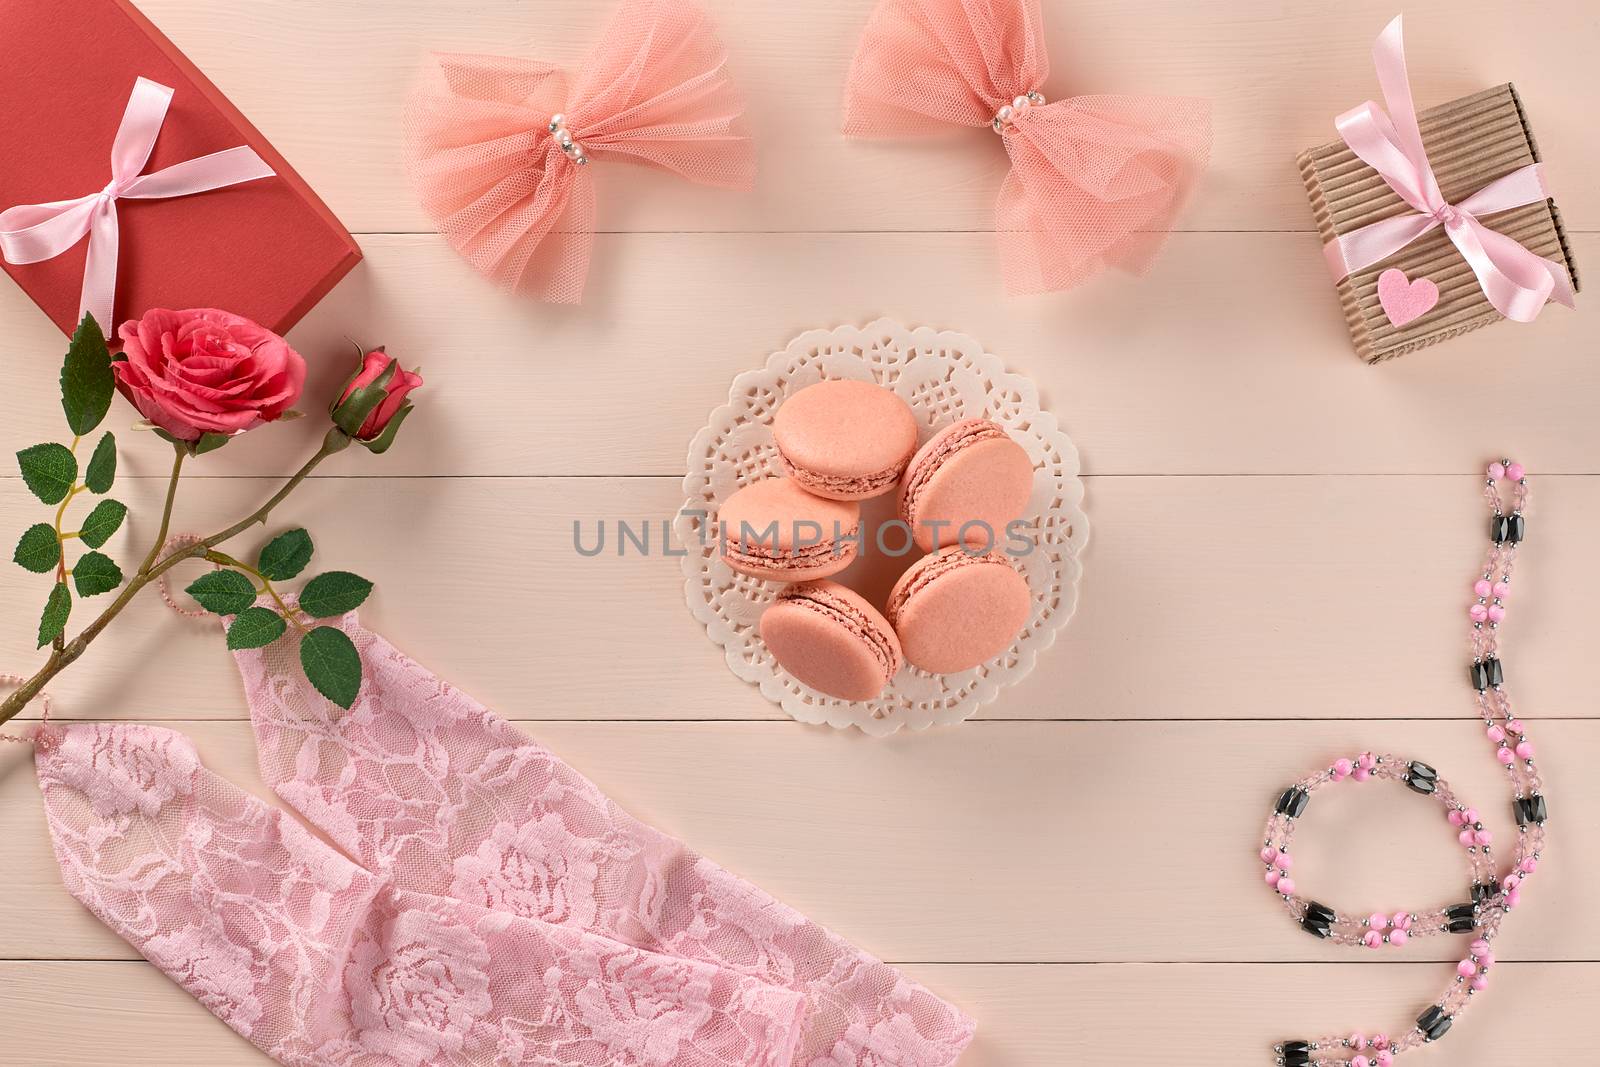 Overhead woman essentials fashion wedding accessories set. Lace gloves, macarons, gift boxes, necklace and roses. Creative bride set, vanilla wooden background. Romantic modern, still life. Top view